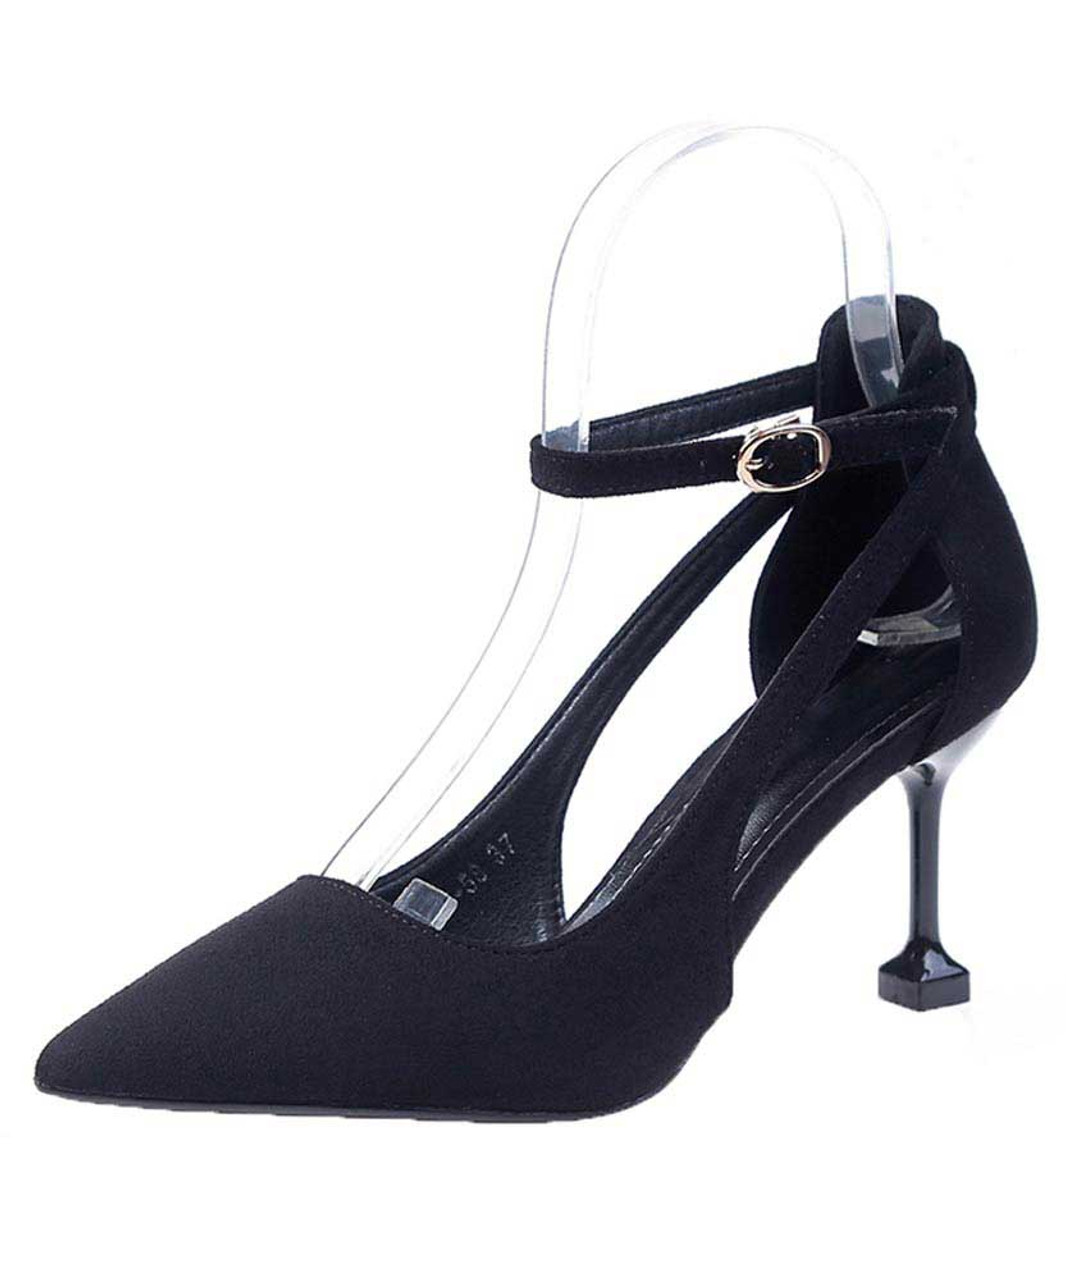 Black suede ankle buckle cut out high heel shoe | Womens heel shoes ...